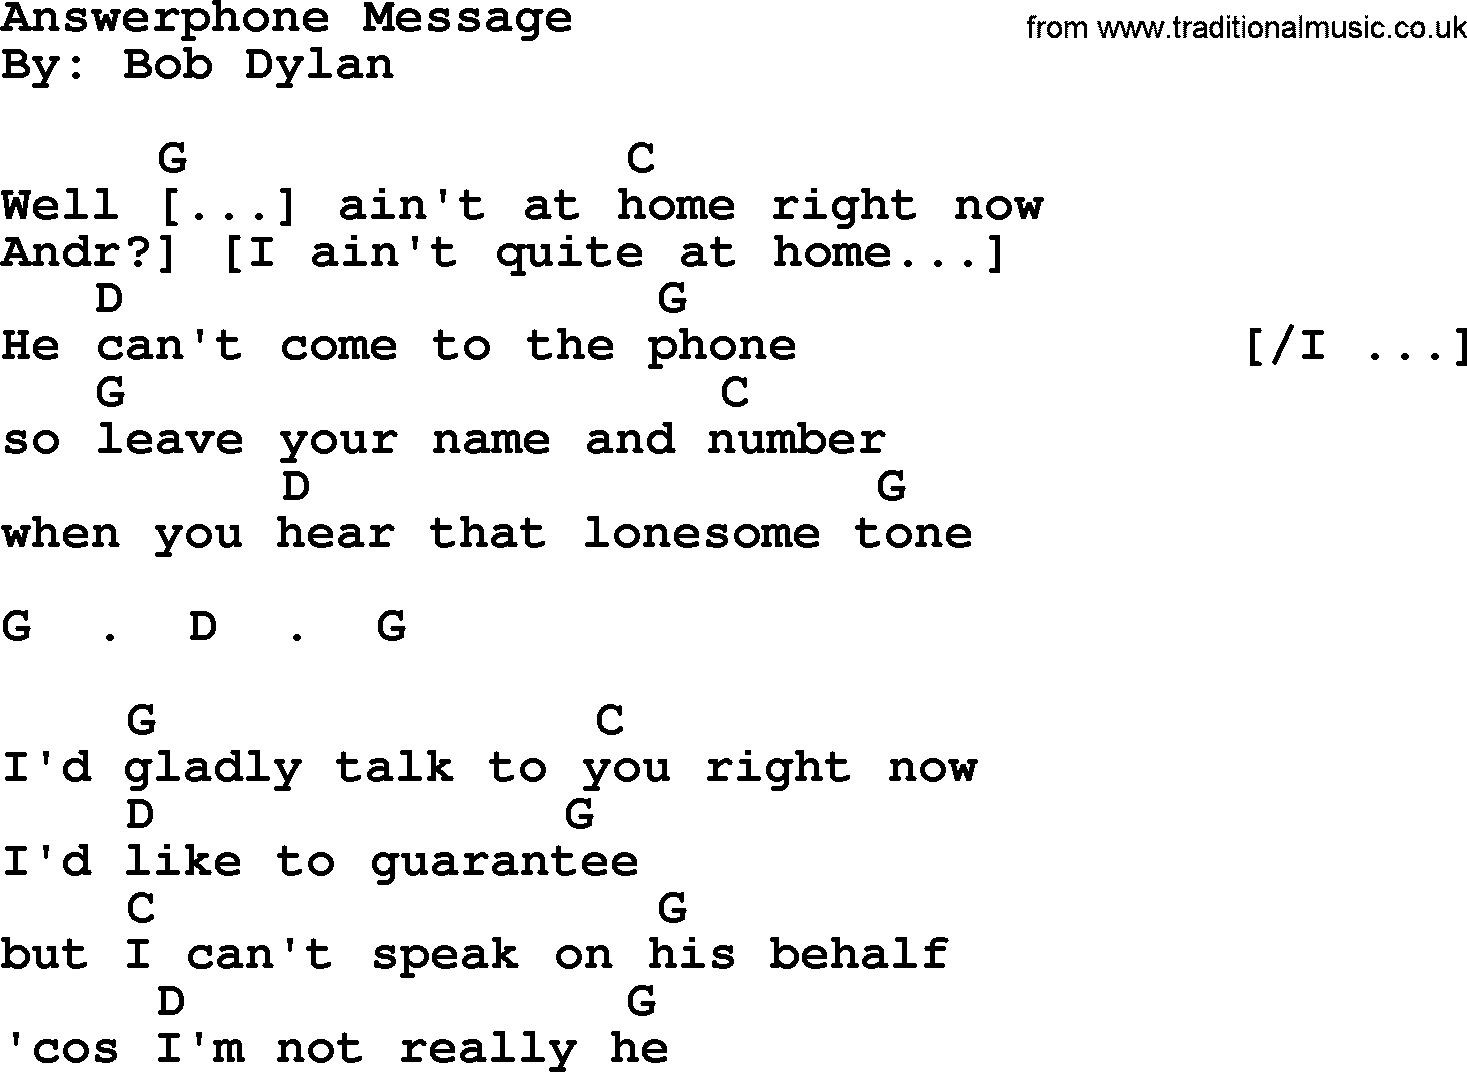 Bob Dylan song, lyrics with chords - Answerphone Message